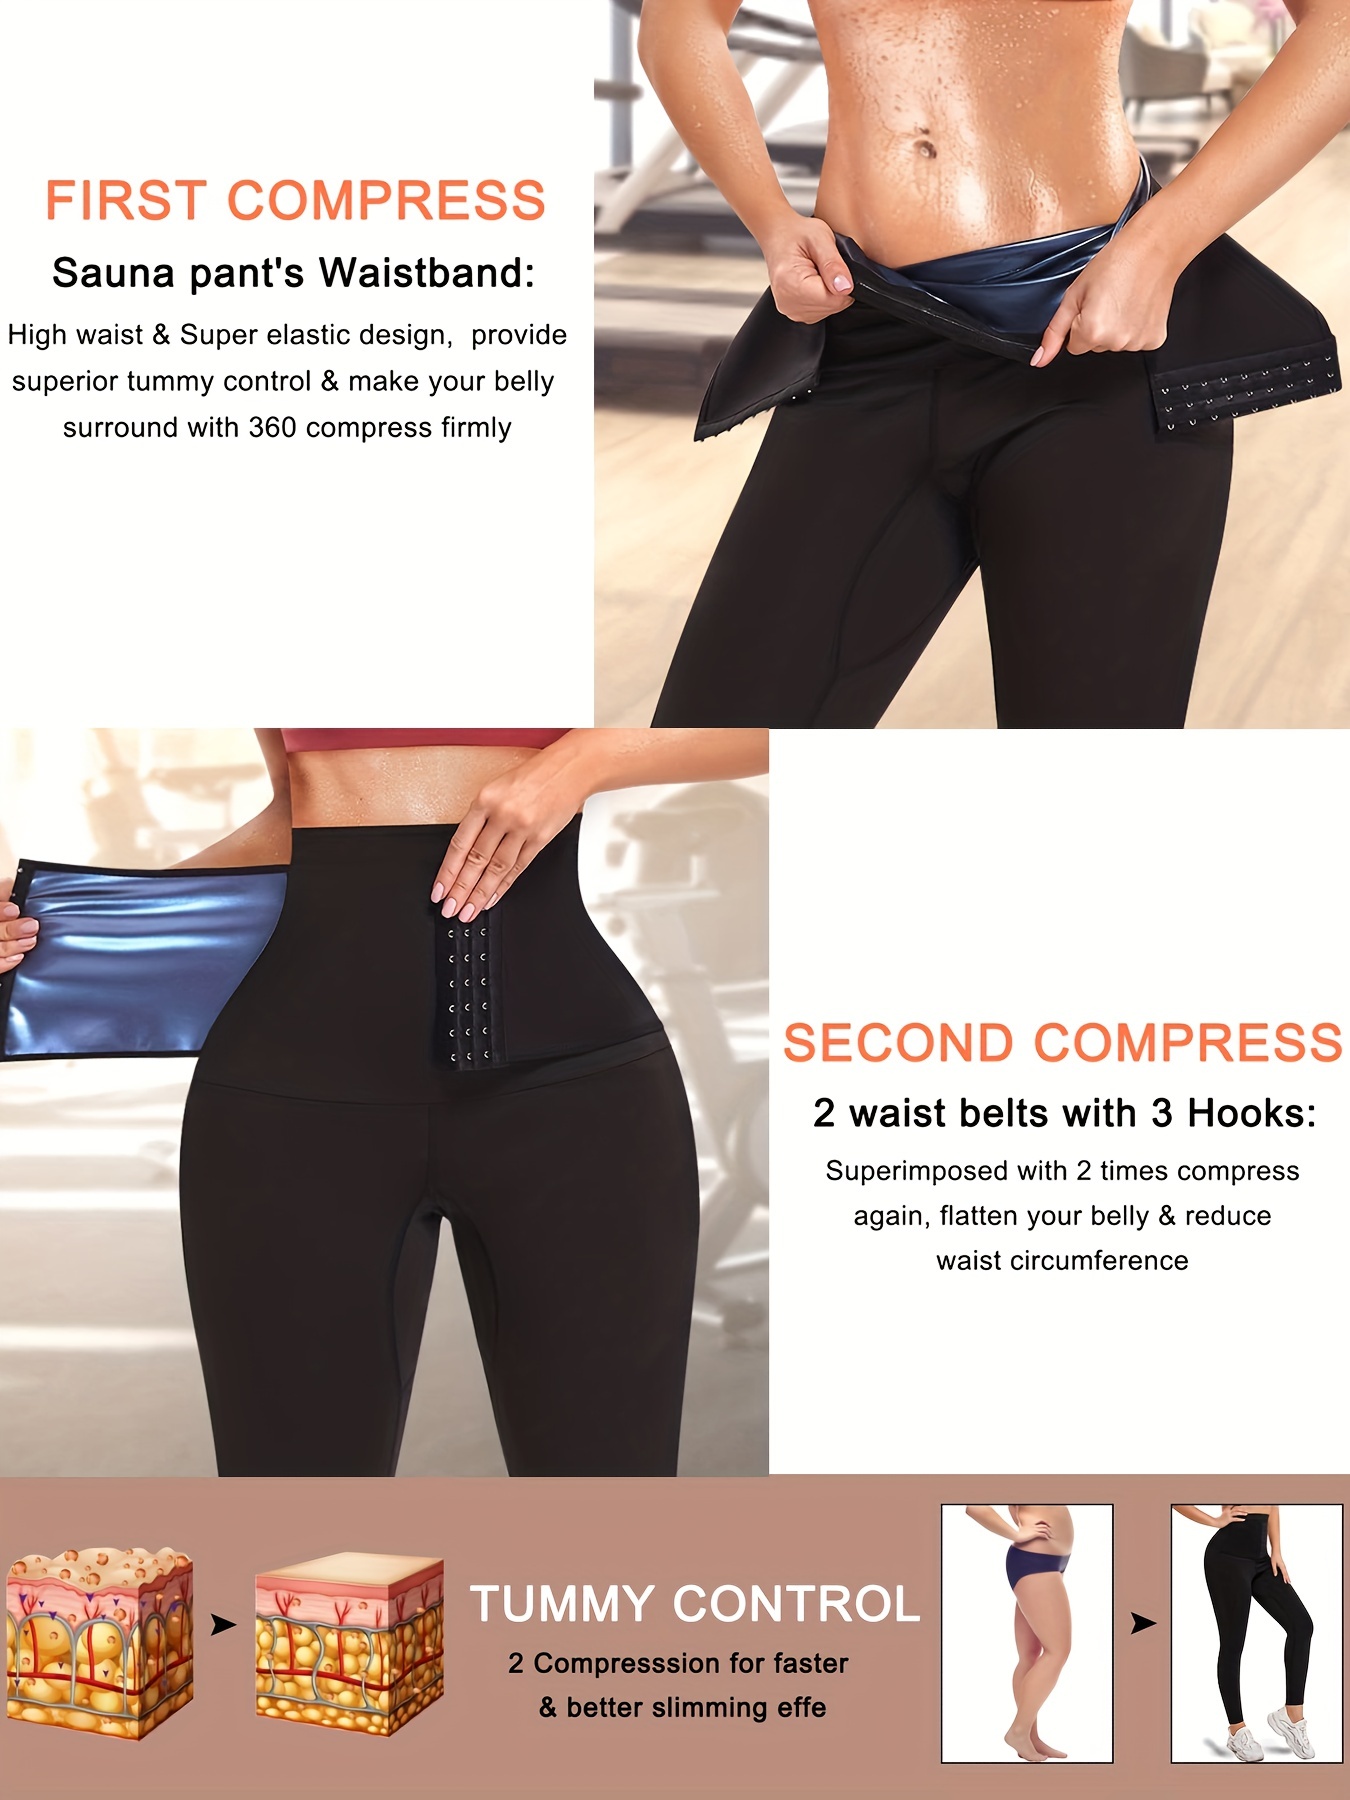 Thermo Sweat Womens Sauna Black Leggings With Pockets Slimming Body Shapers  For Gym And Workouts From Chensuiqz, $14.13